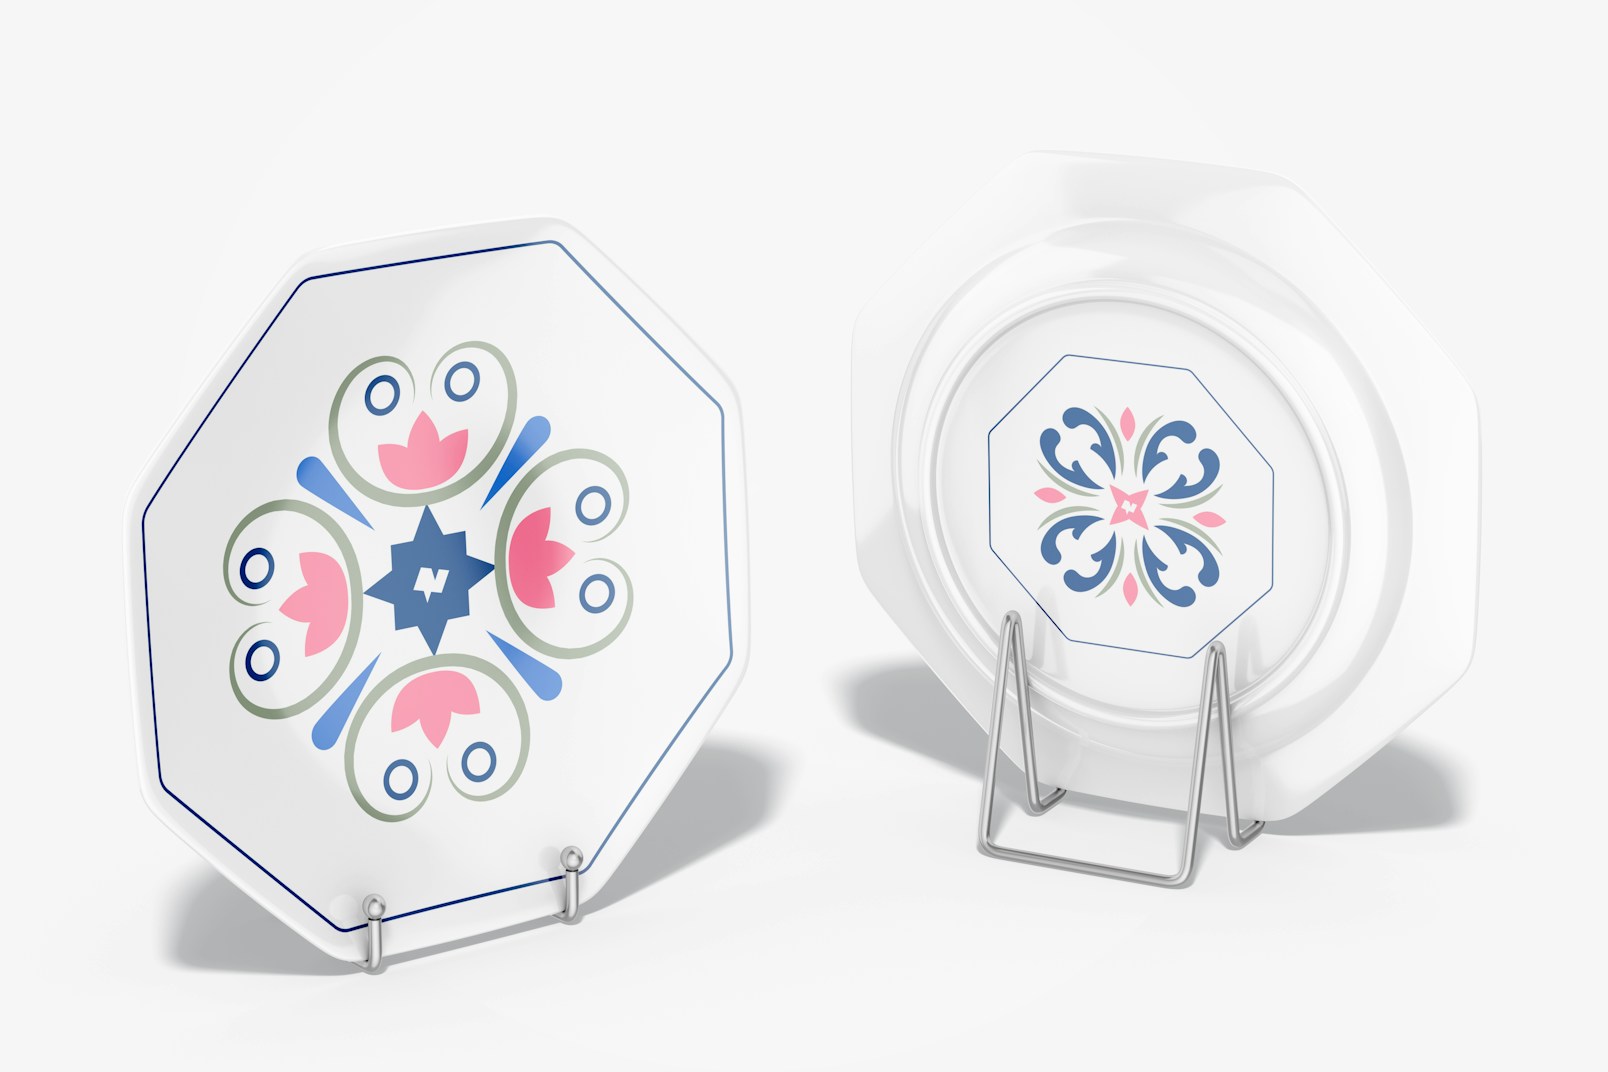 Octagonal Plates Mockup, Front and Back View